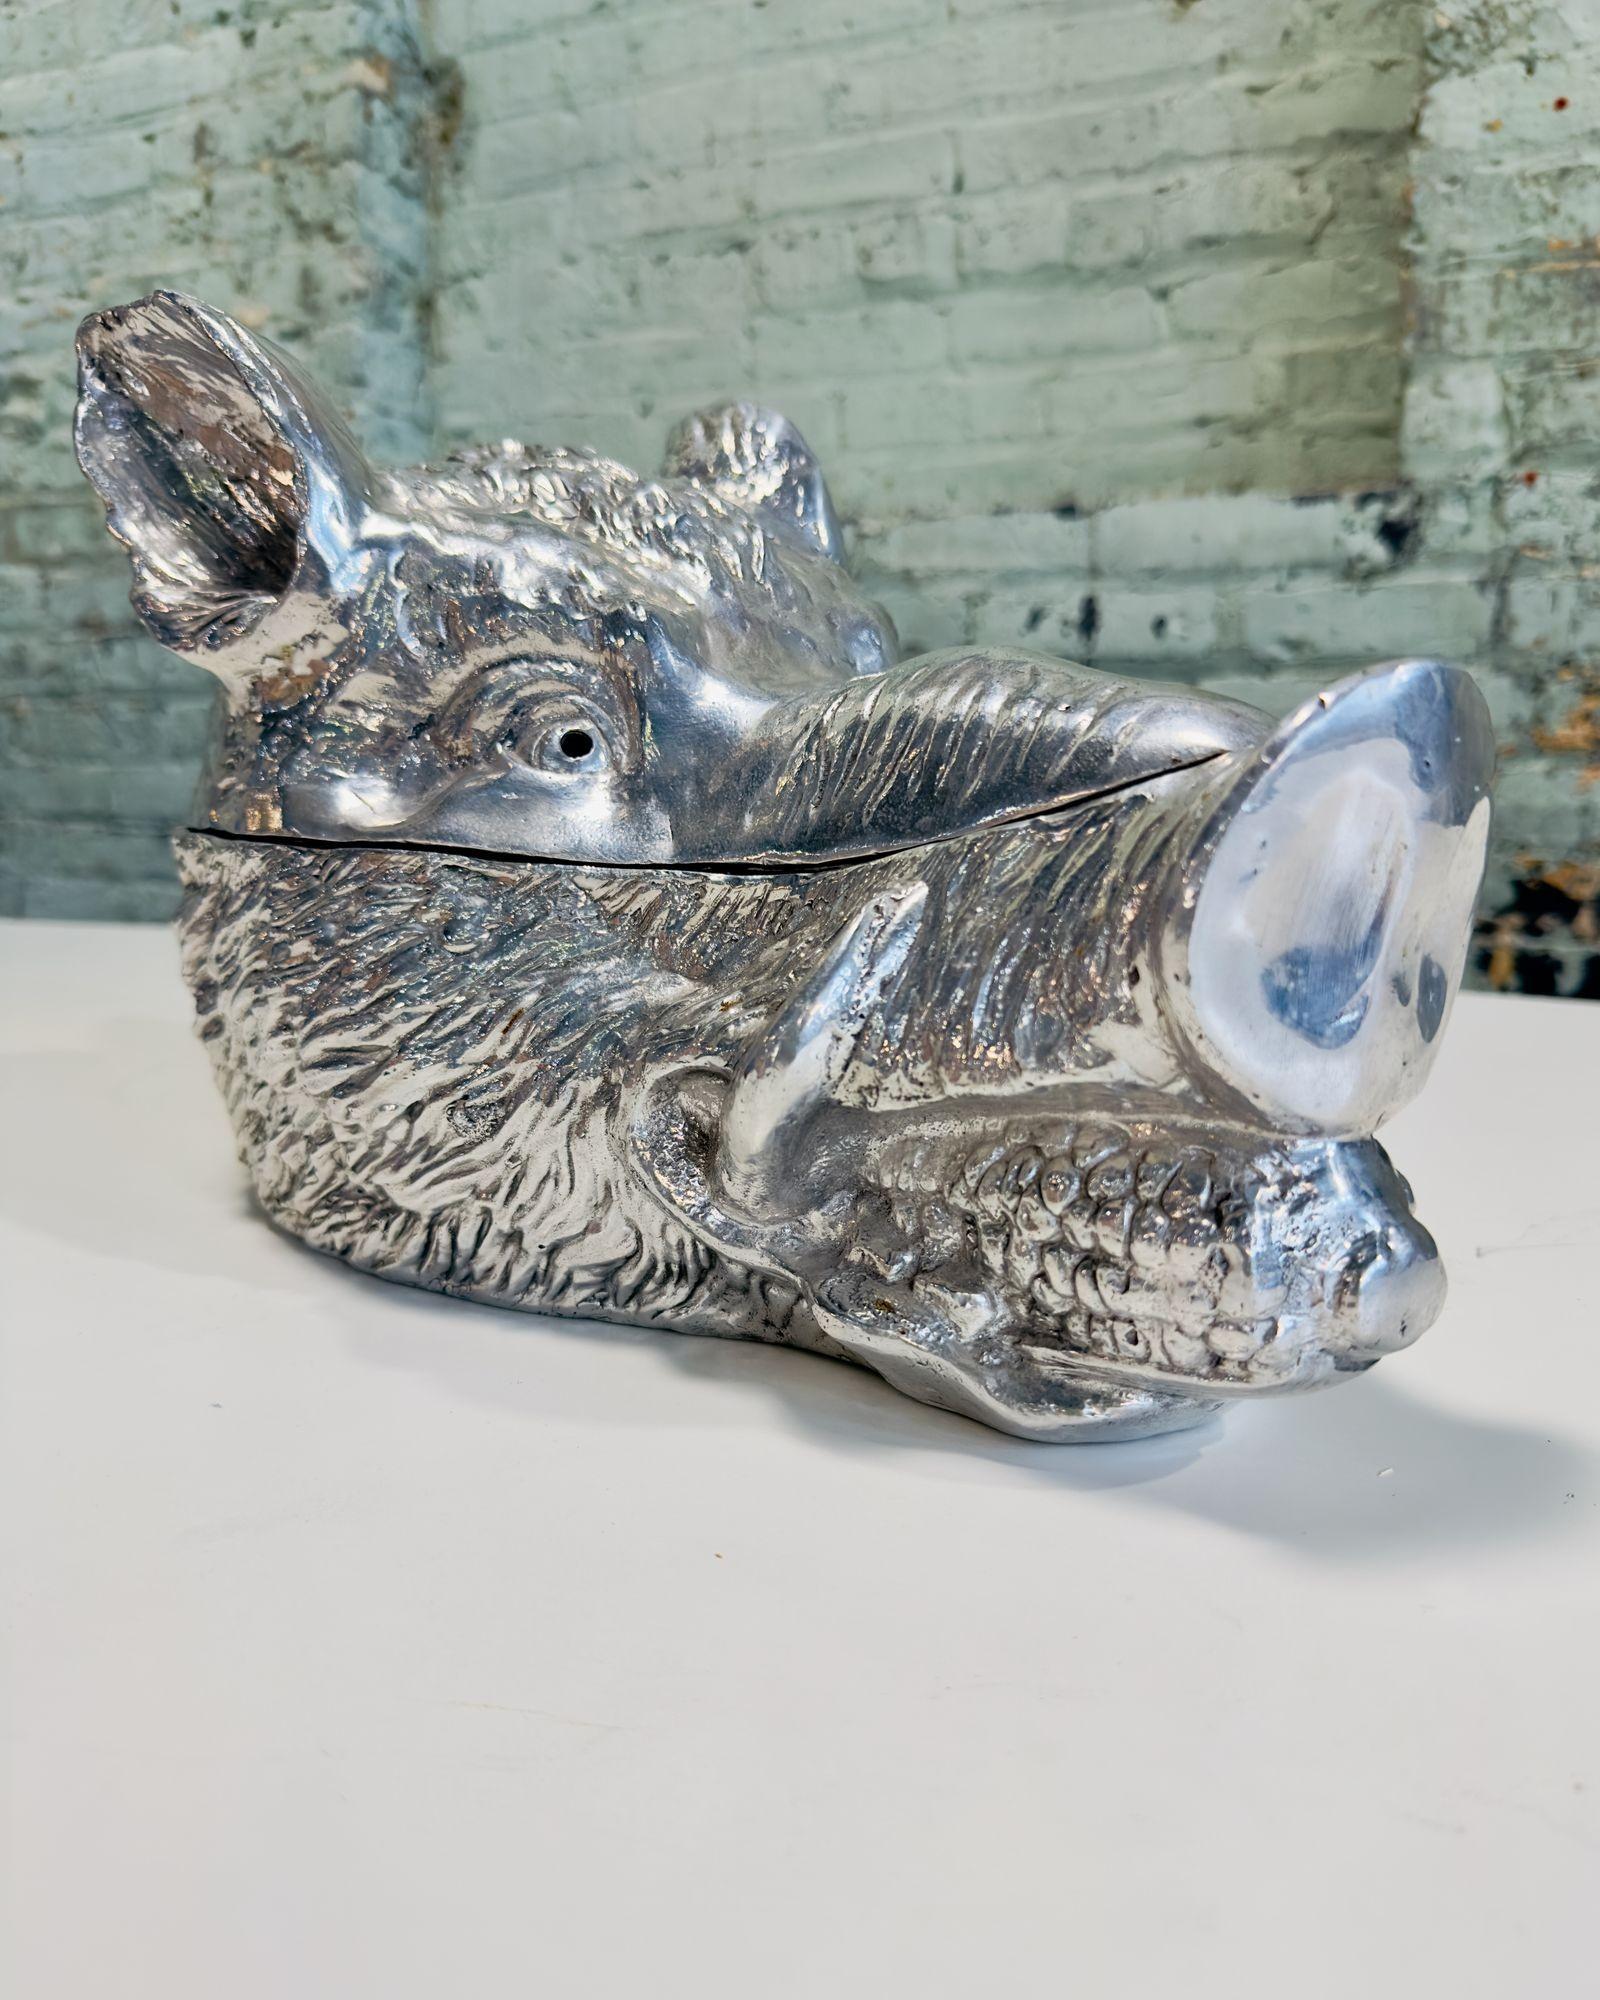 Arthur Court Aluminum Wild Boar Tureen, 1990. The boar can hold an ear of corn in its mouth and steam comes out of its eyes when hot food is placed inside. Very rare piece in excellent condition.